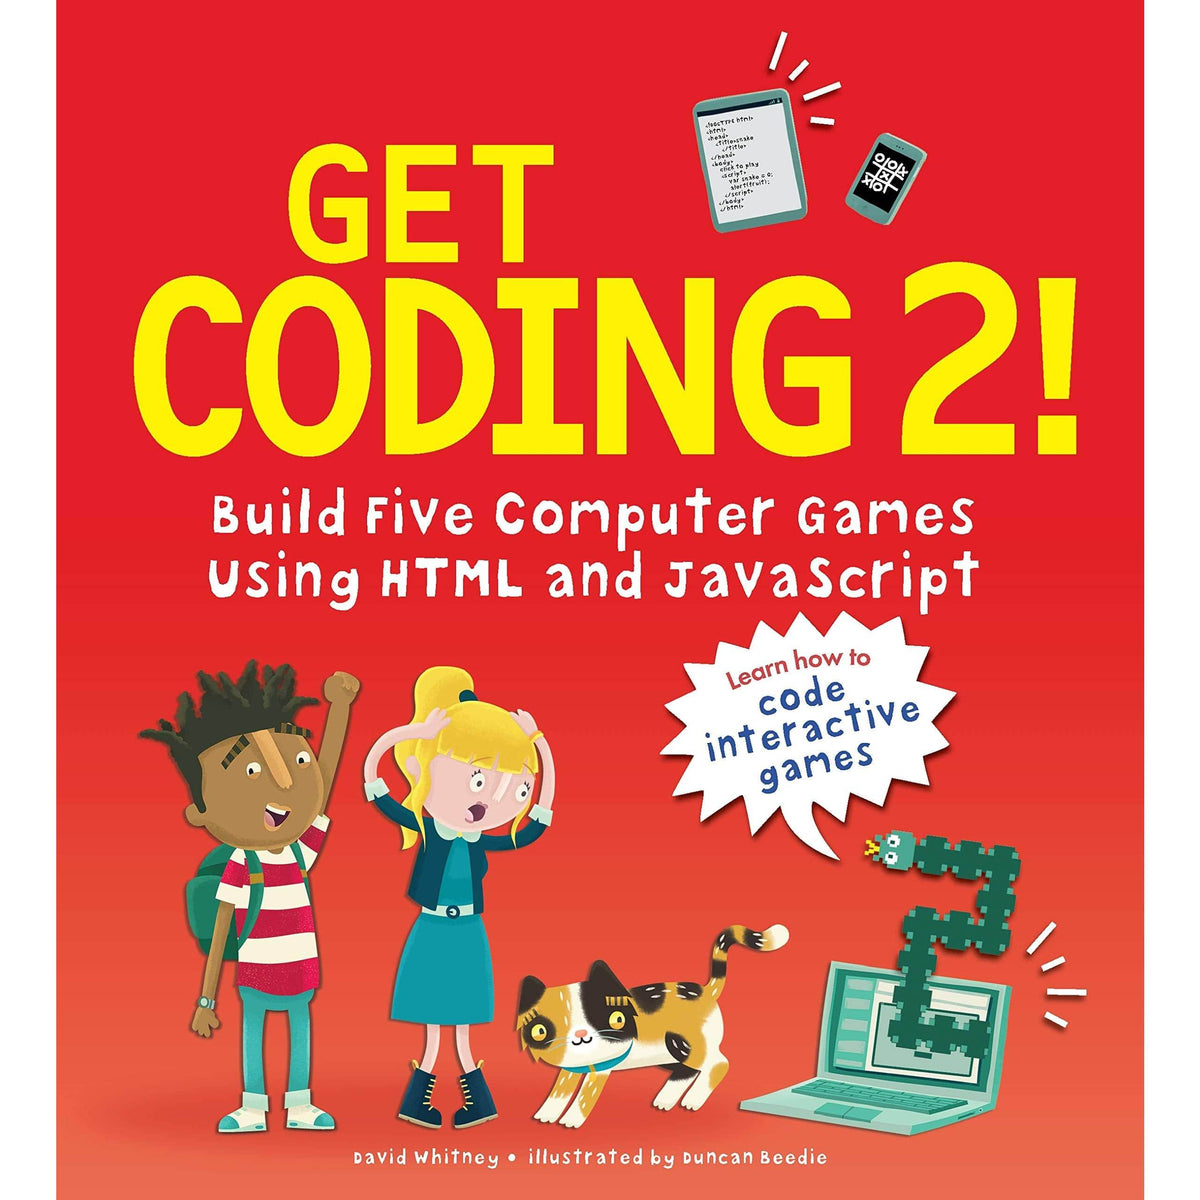 Get Coding 2! Build Five Computer Games Using HTML and JavaScript - MakoStars Online Store